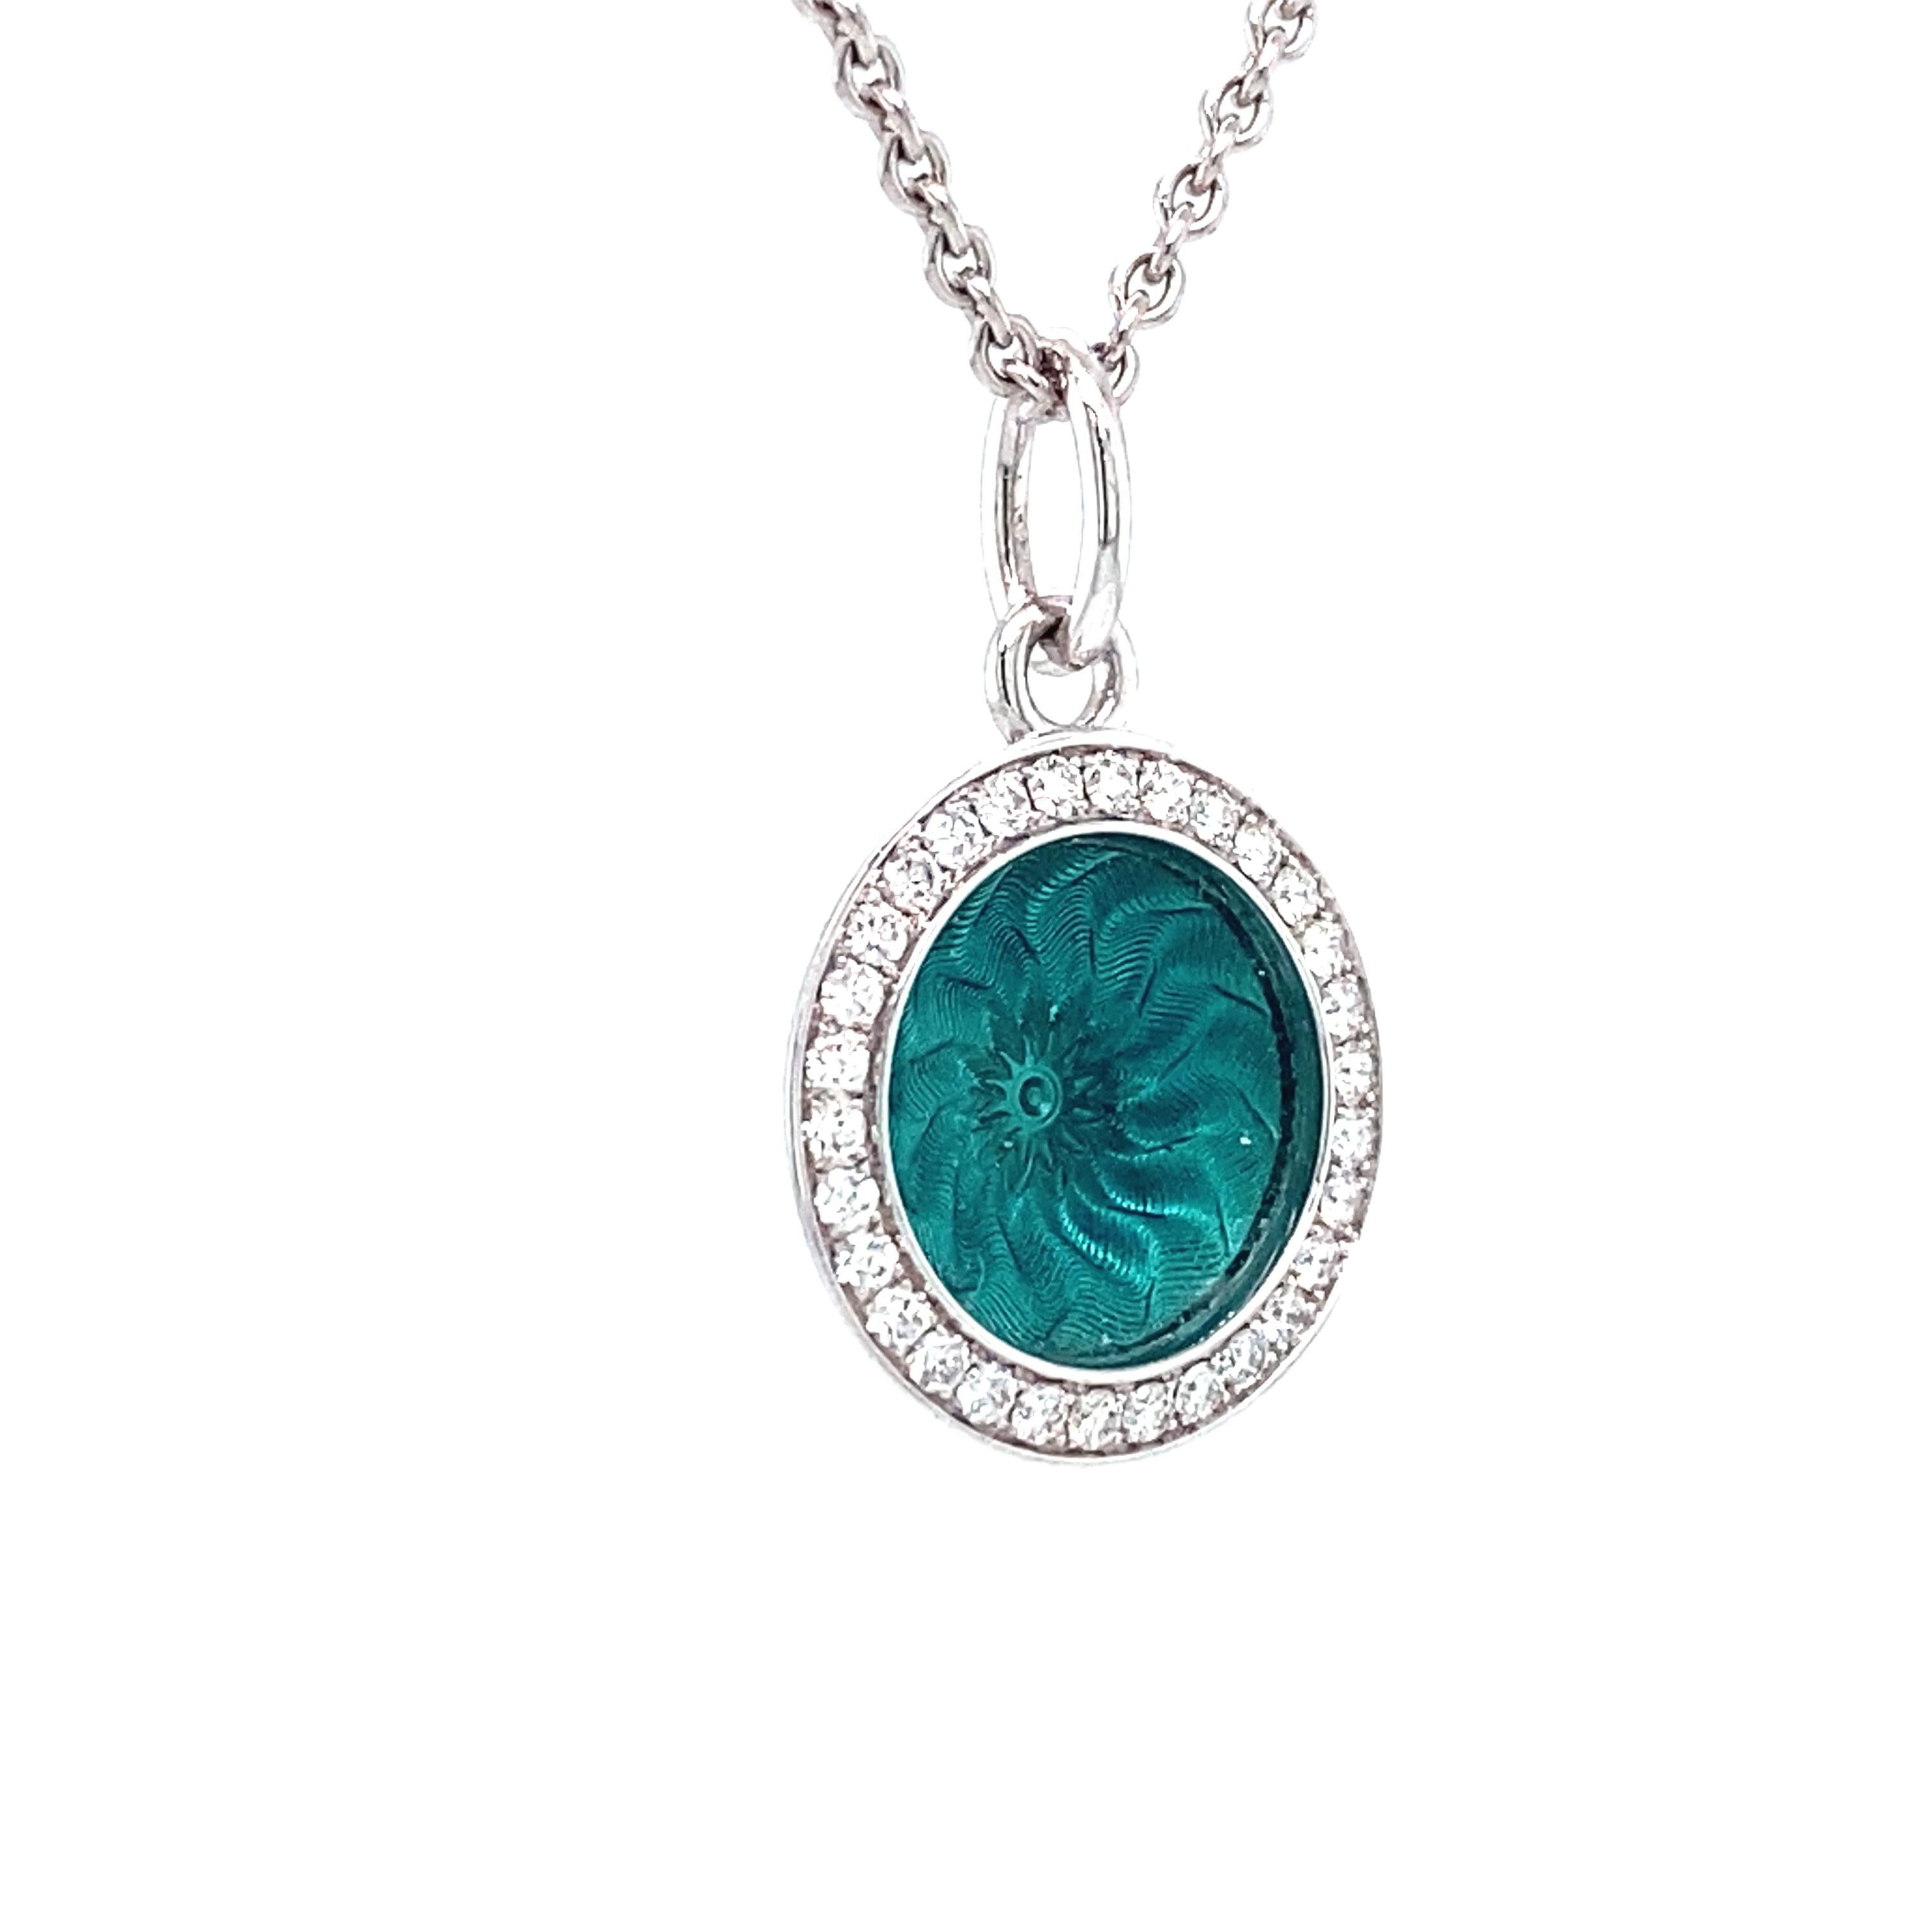 Victor Mayer round pendant necklace 18k white gold, Trance Collection, translucent turquoise vitreous enamel, guilloche, 30 diamonds, total 0.15 ct, G VS, diameter app. 12.5 mm

About the creator Victor Mayer
Victor Mayer is internationally renowned